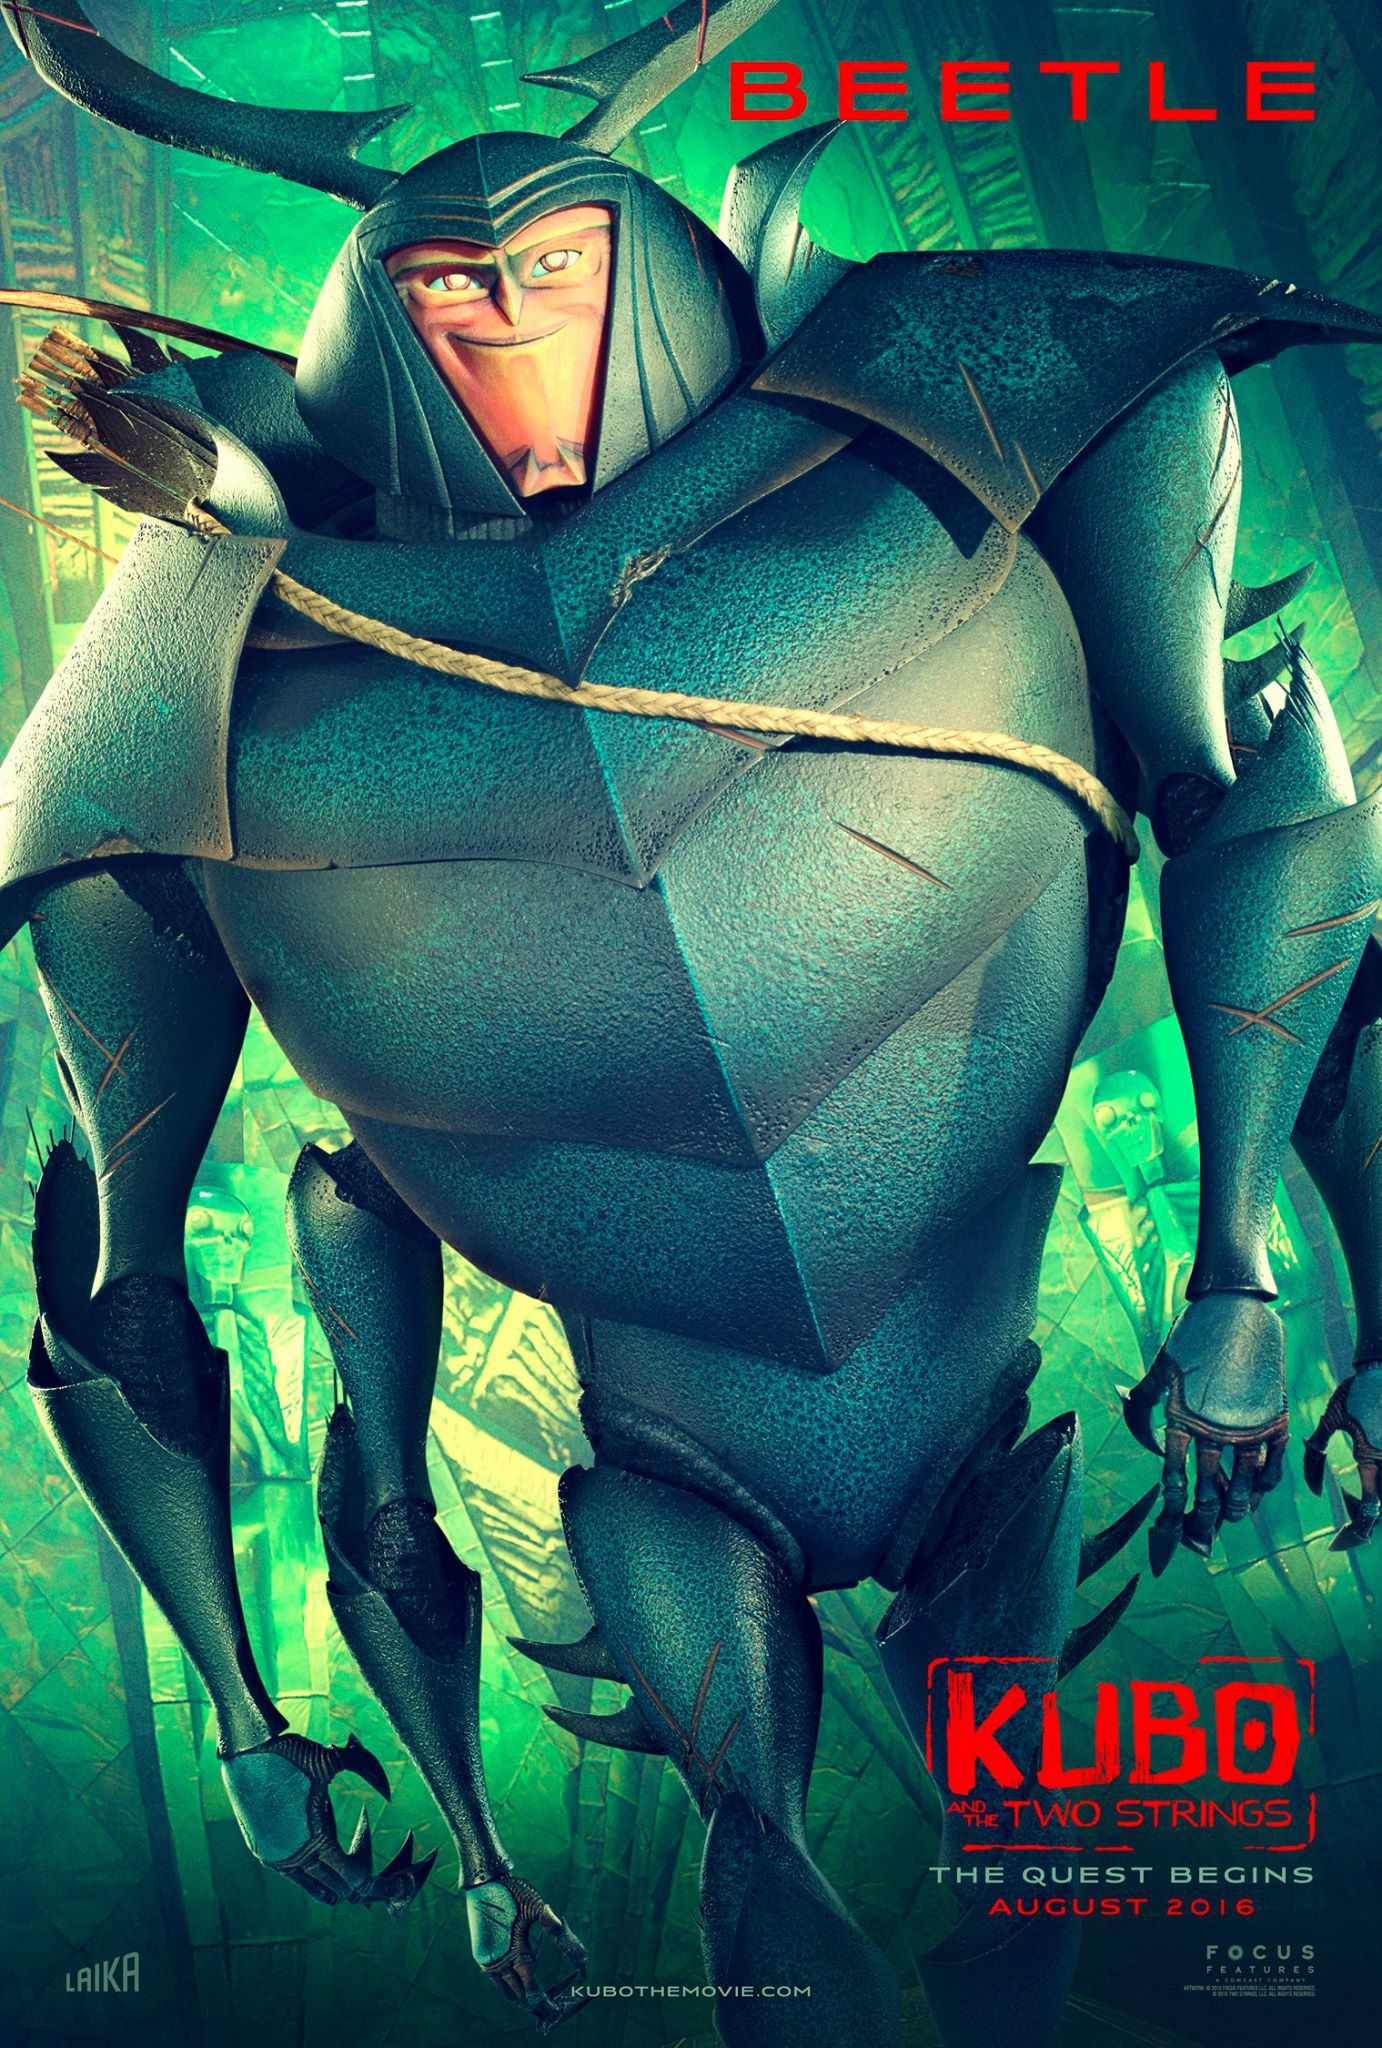 Kubo and the Two Strings Beetle Poster